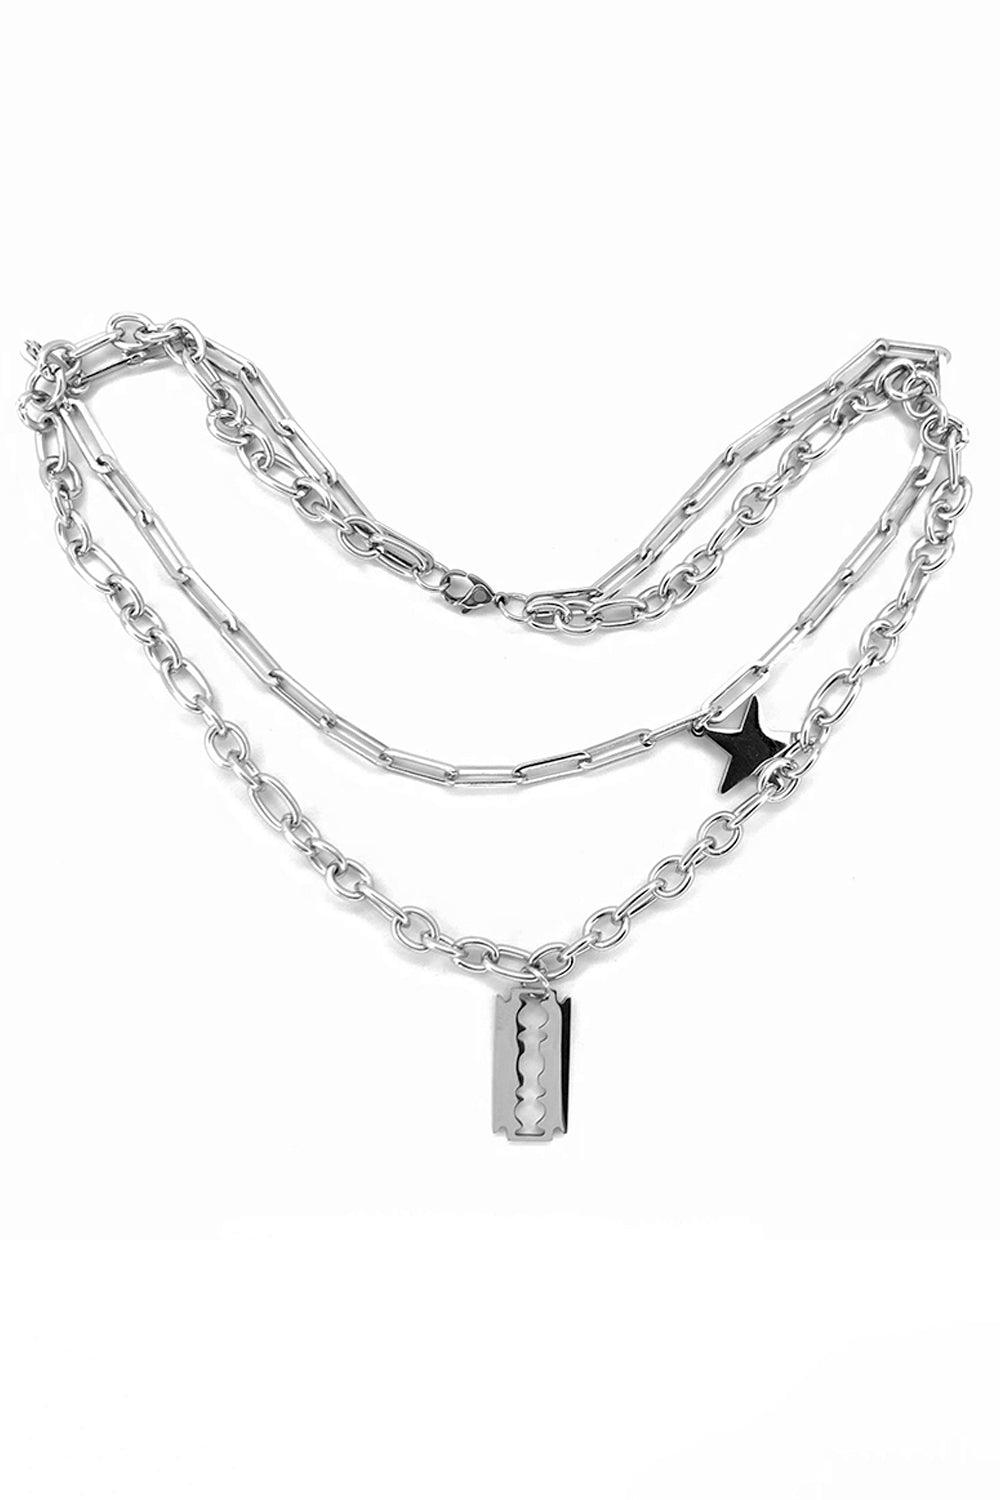 Soft Grunge Razor Blade Chain Necklace - Aesthetic Clothes Shop